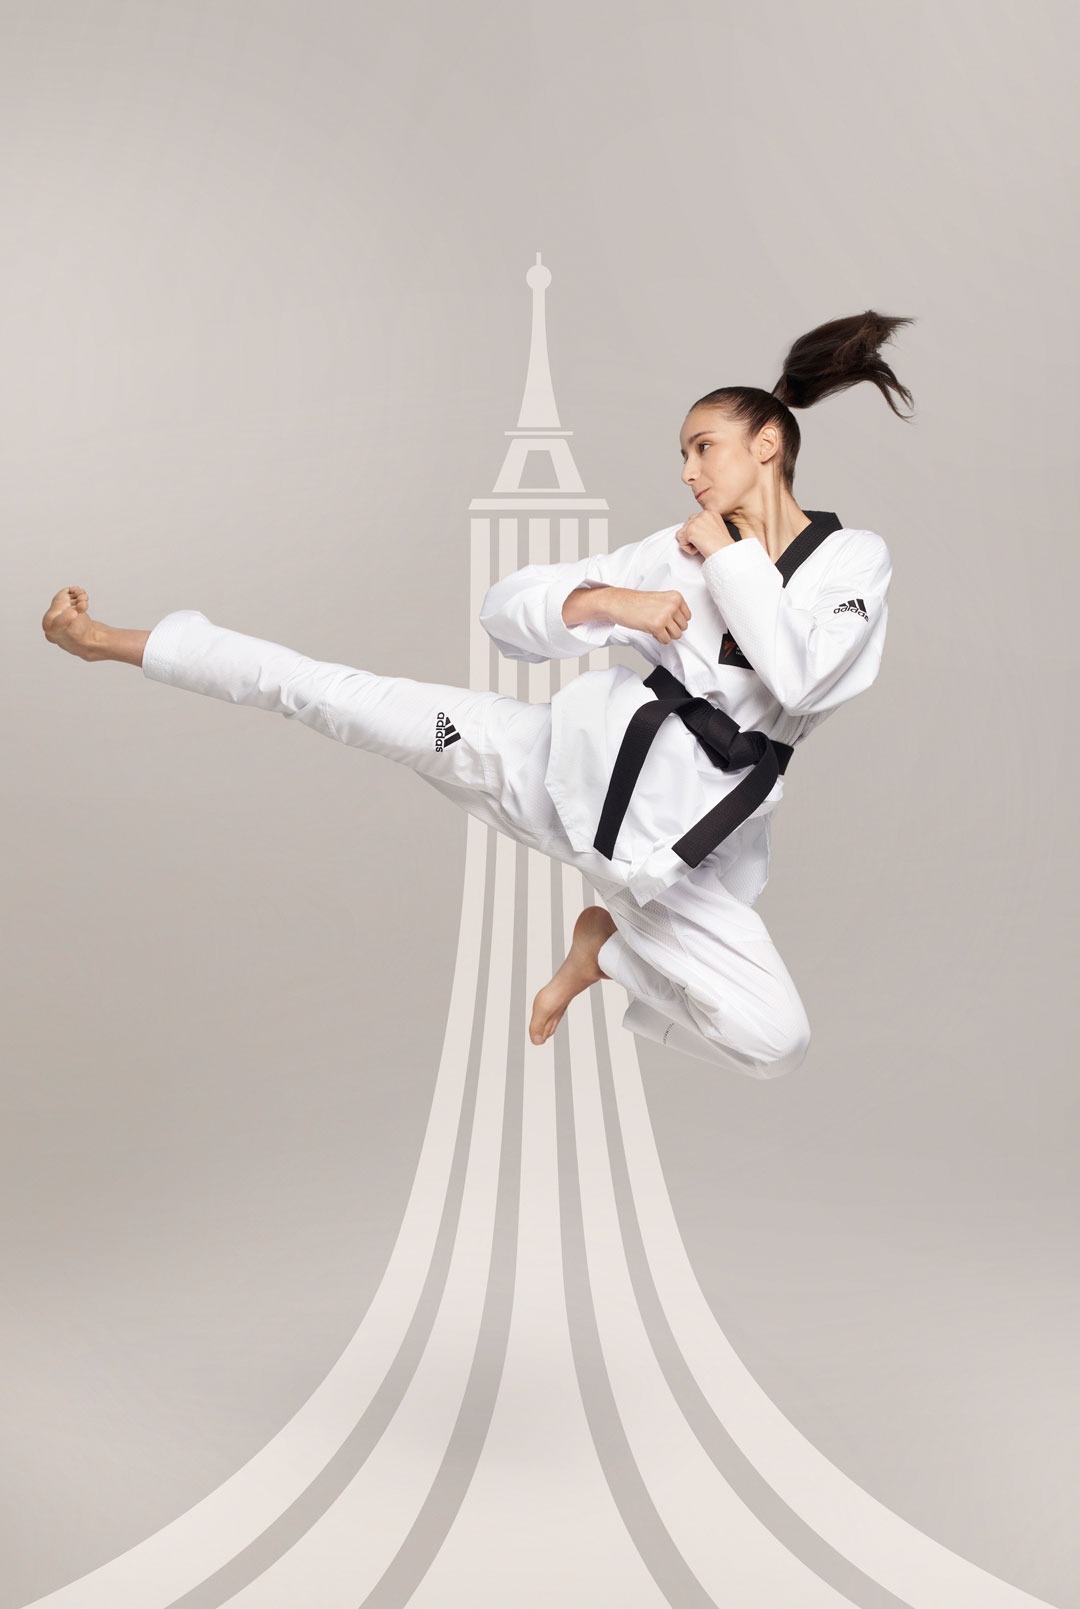 Adriana Cerezo, silver at the Tokyo Games, has set her sights high in the french capital